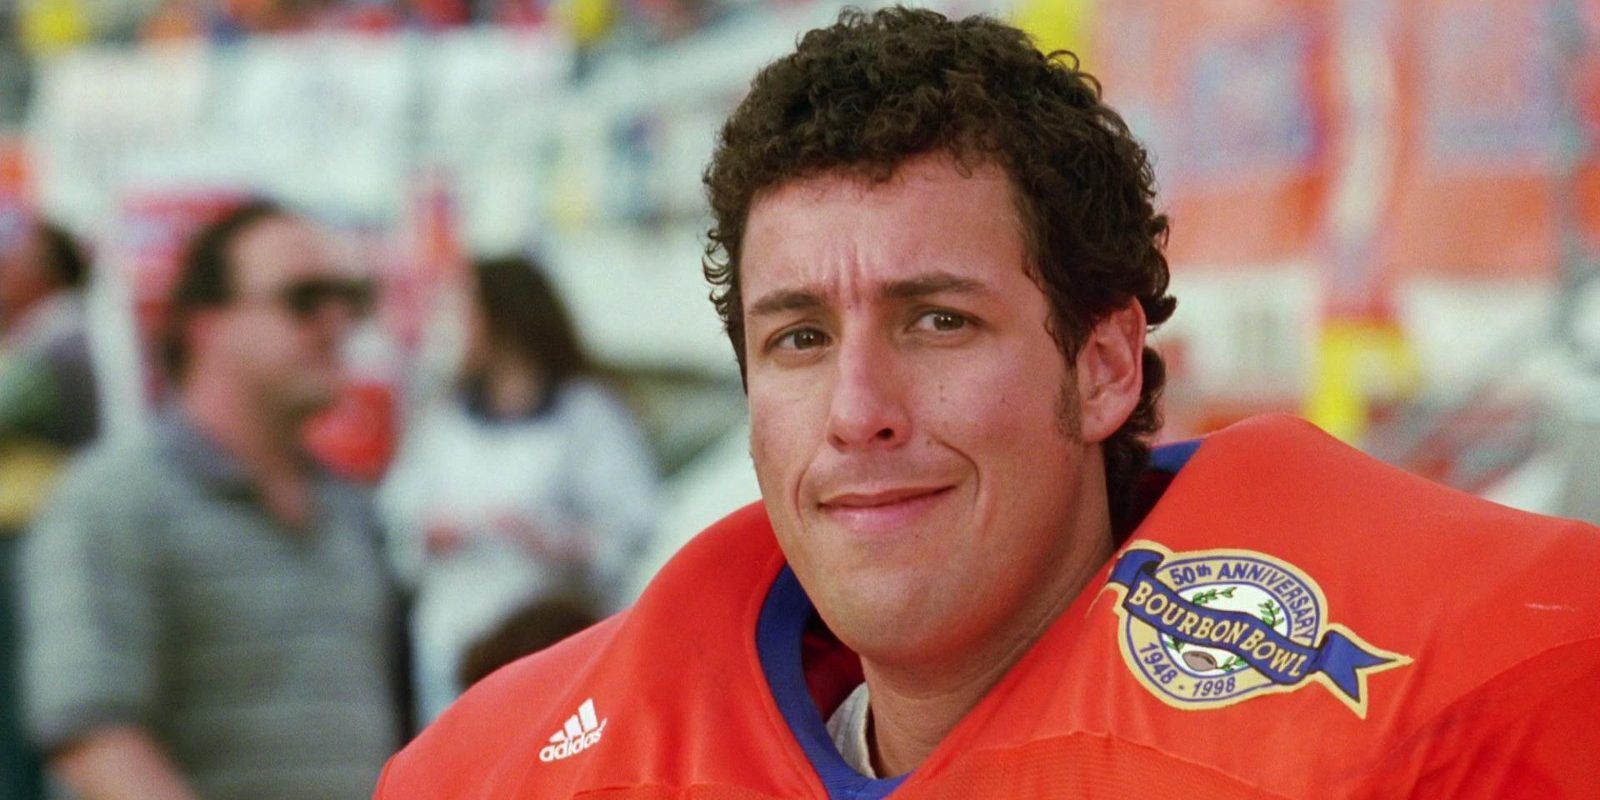 10 Best Fictional Football Players In Movies & TV Shows